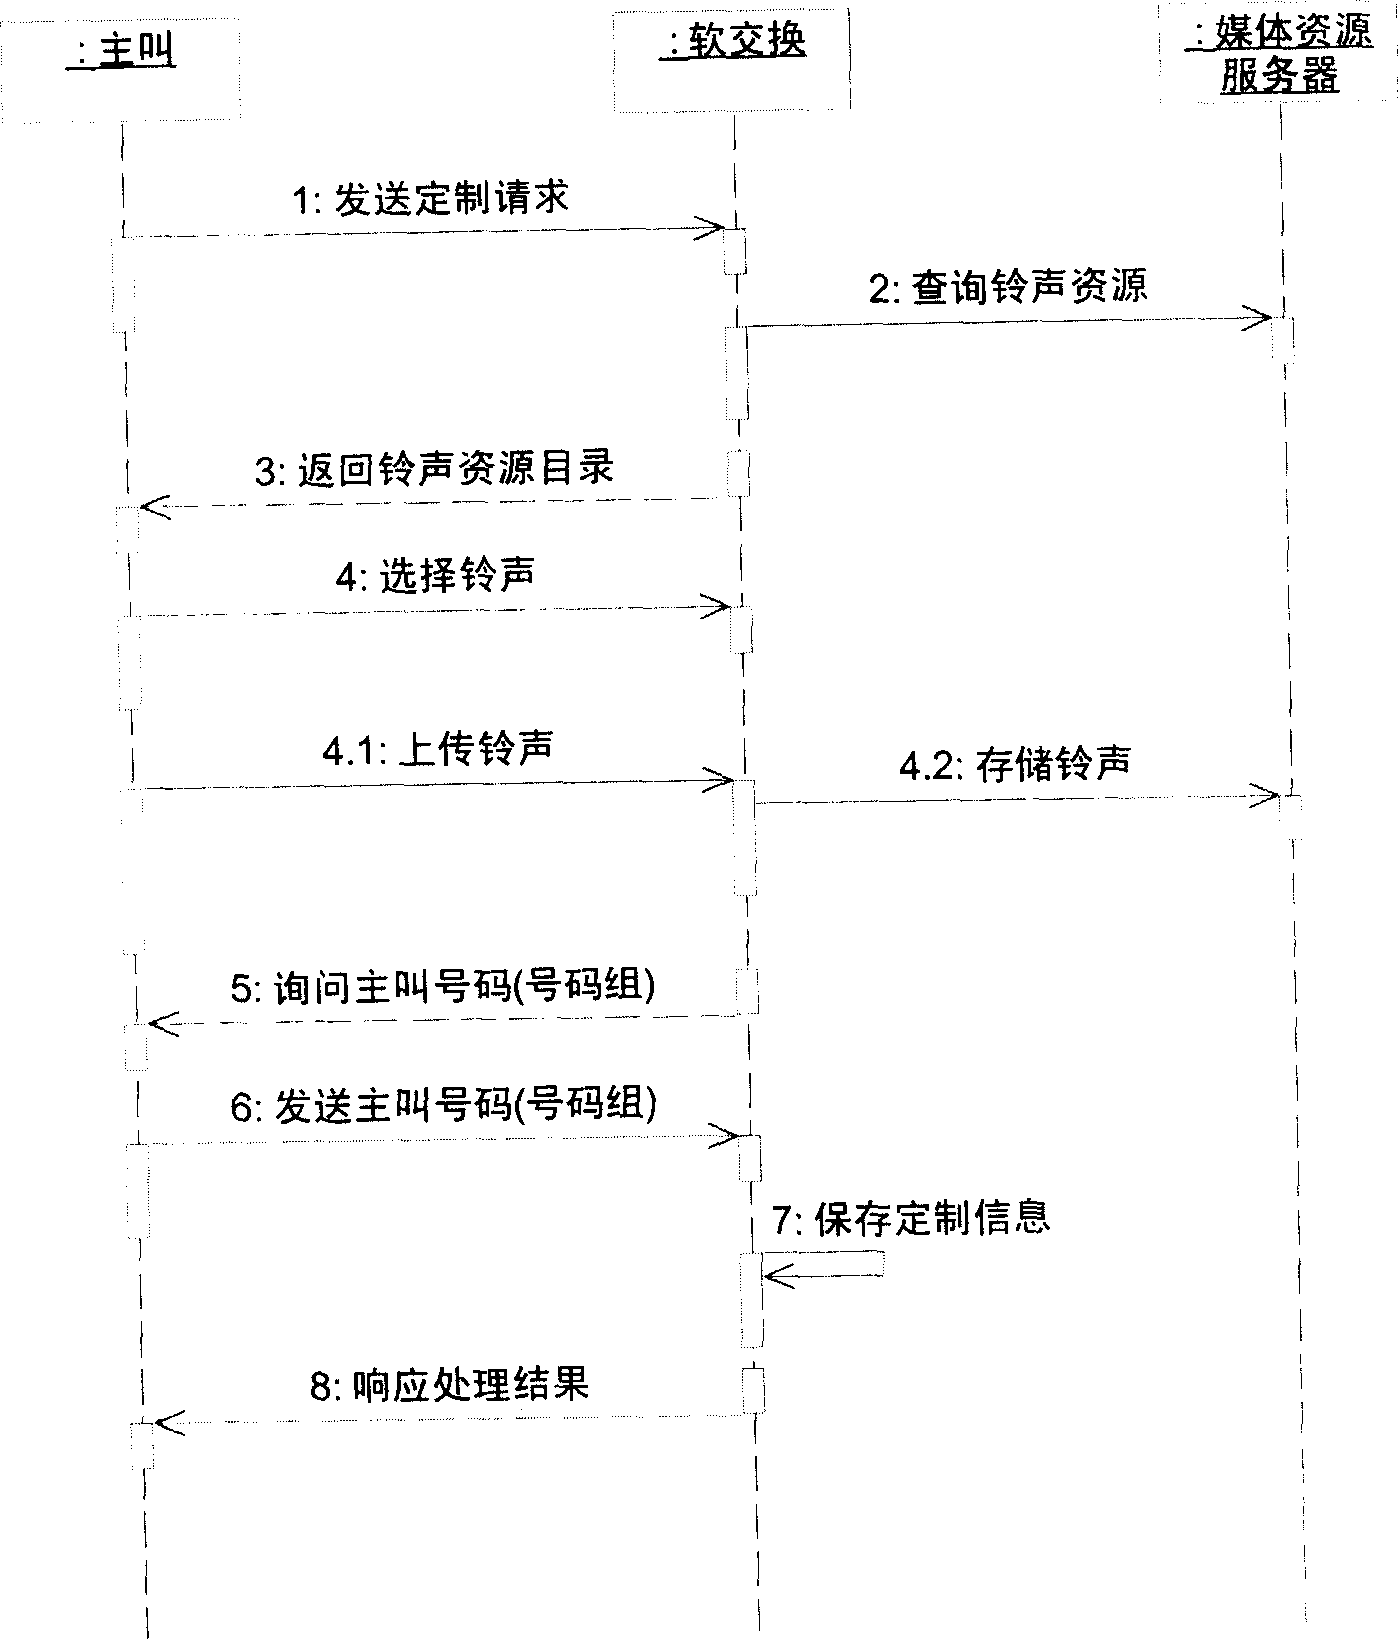 Method and system for receiving and setting multiple color ringing tone